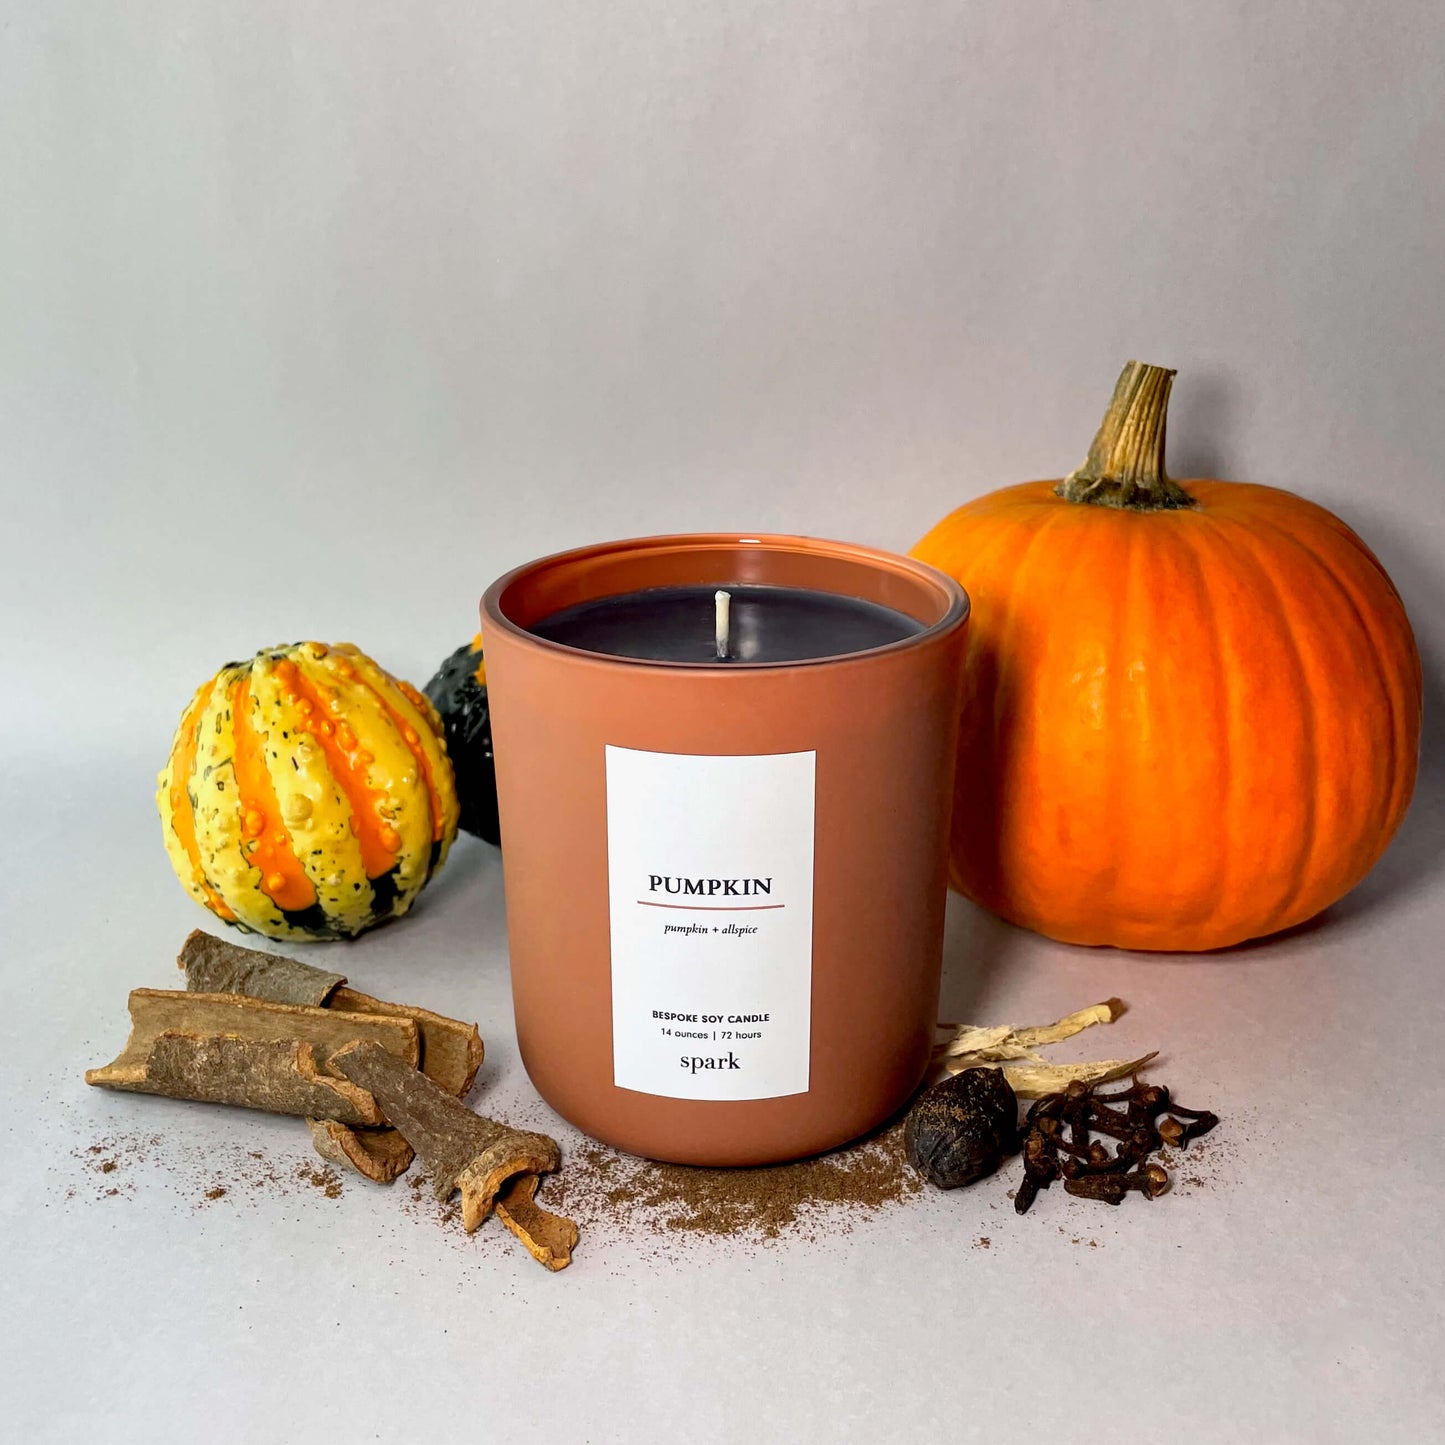 Pumpkin Scented Aromatherapy Candle from Spark Candles with Ripe Pumpkin, Cinnamon, Clove, Nutmeg and Black Pepper Notes, Like a Pumpkin Spice Latte. Hand Poured in Toronto